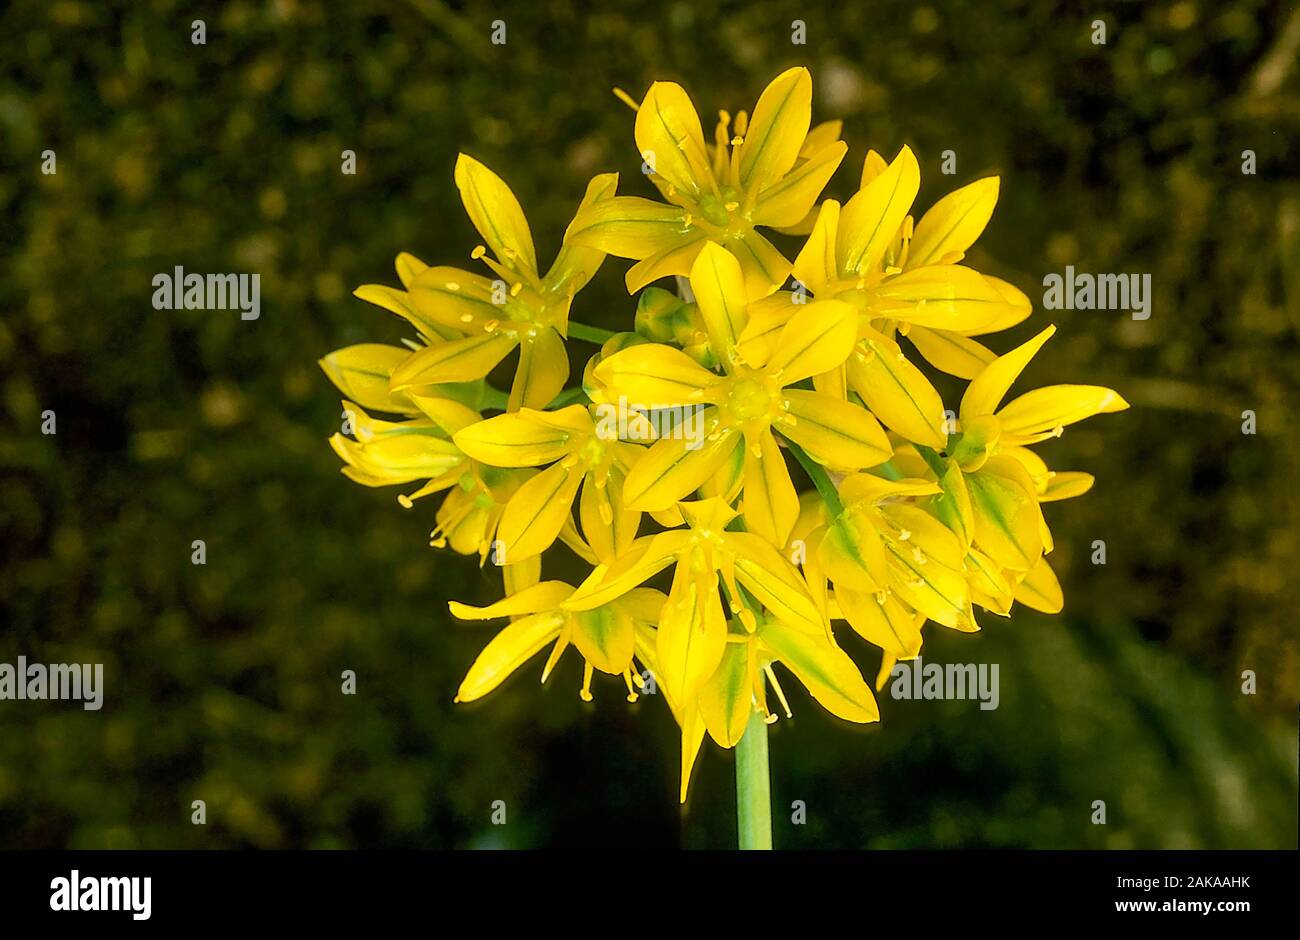 Flowerhead of Allium moly, Golden garlic or Yellow onion. A summer flowering bulbous perennial that is ideal for woodland areas. Stock Photo